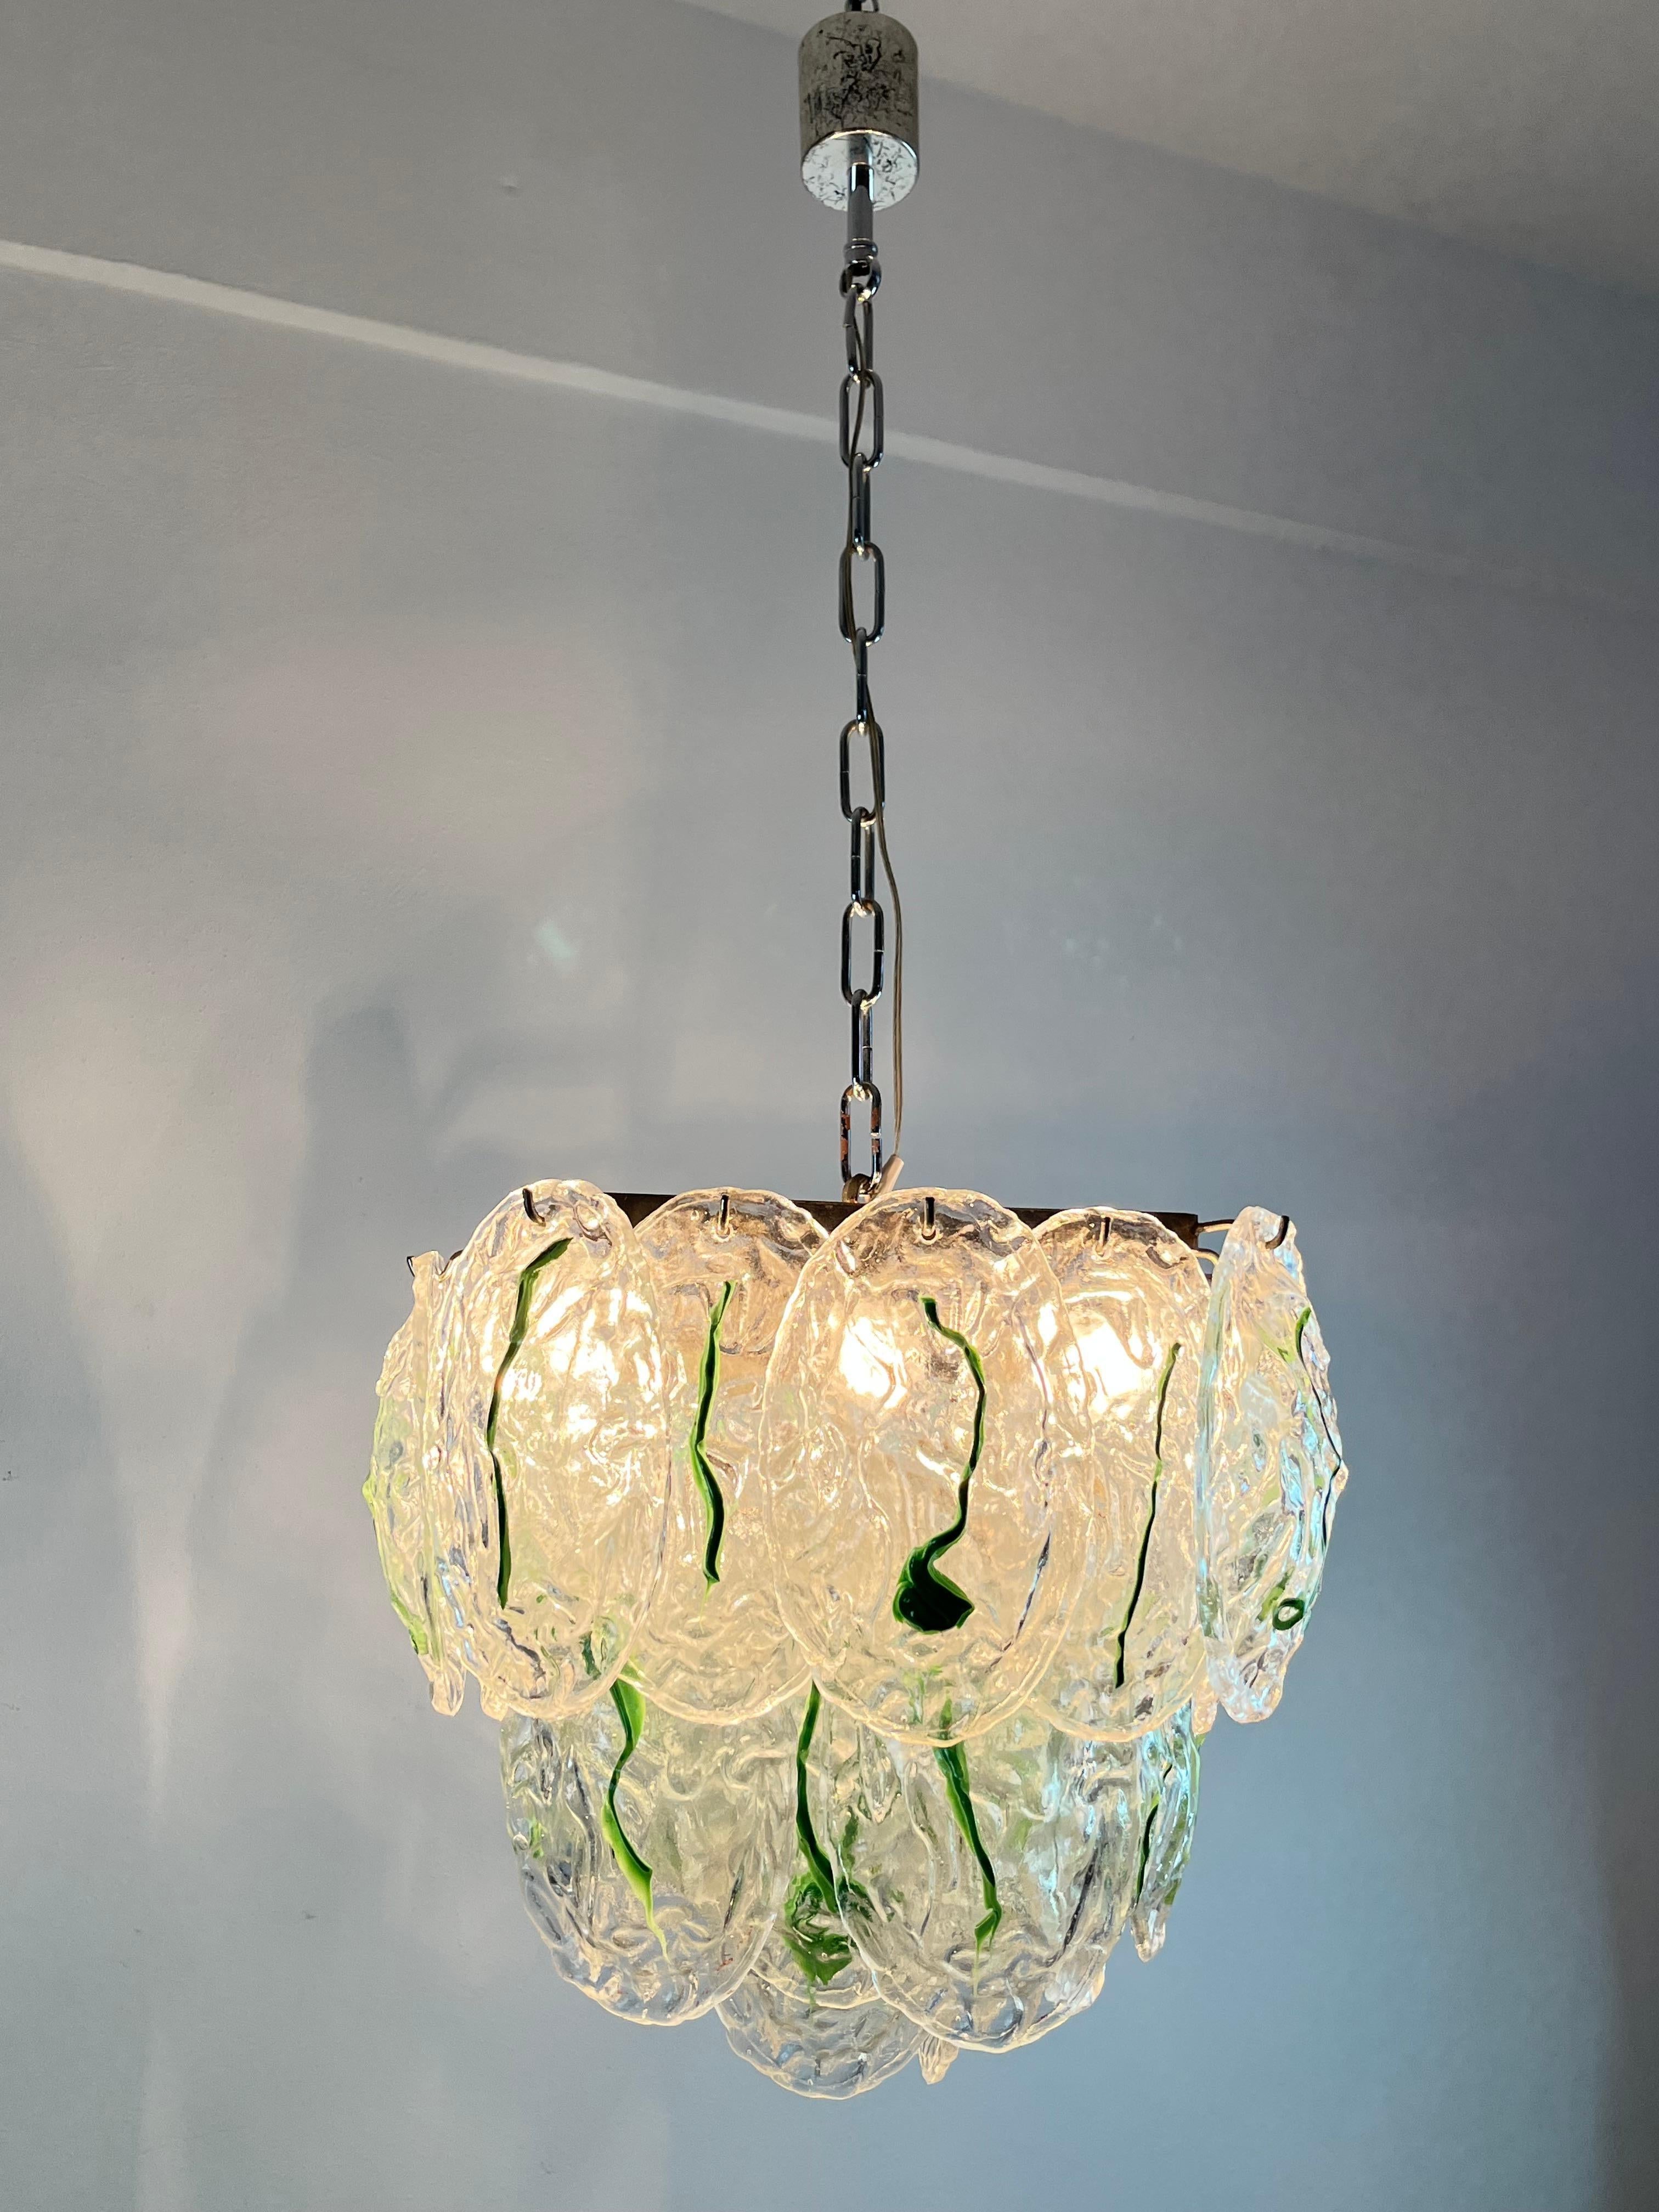 Six-light Murano Glass Chandelier by Vistosi, Italy, 1960s For Sale 1